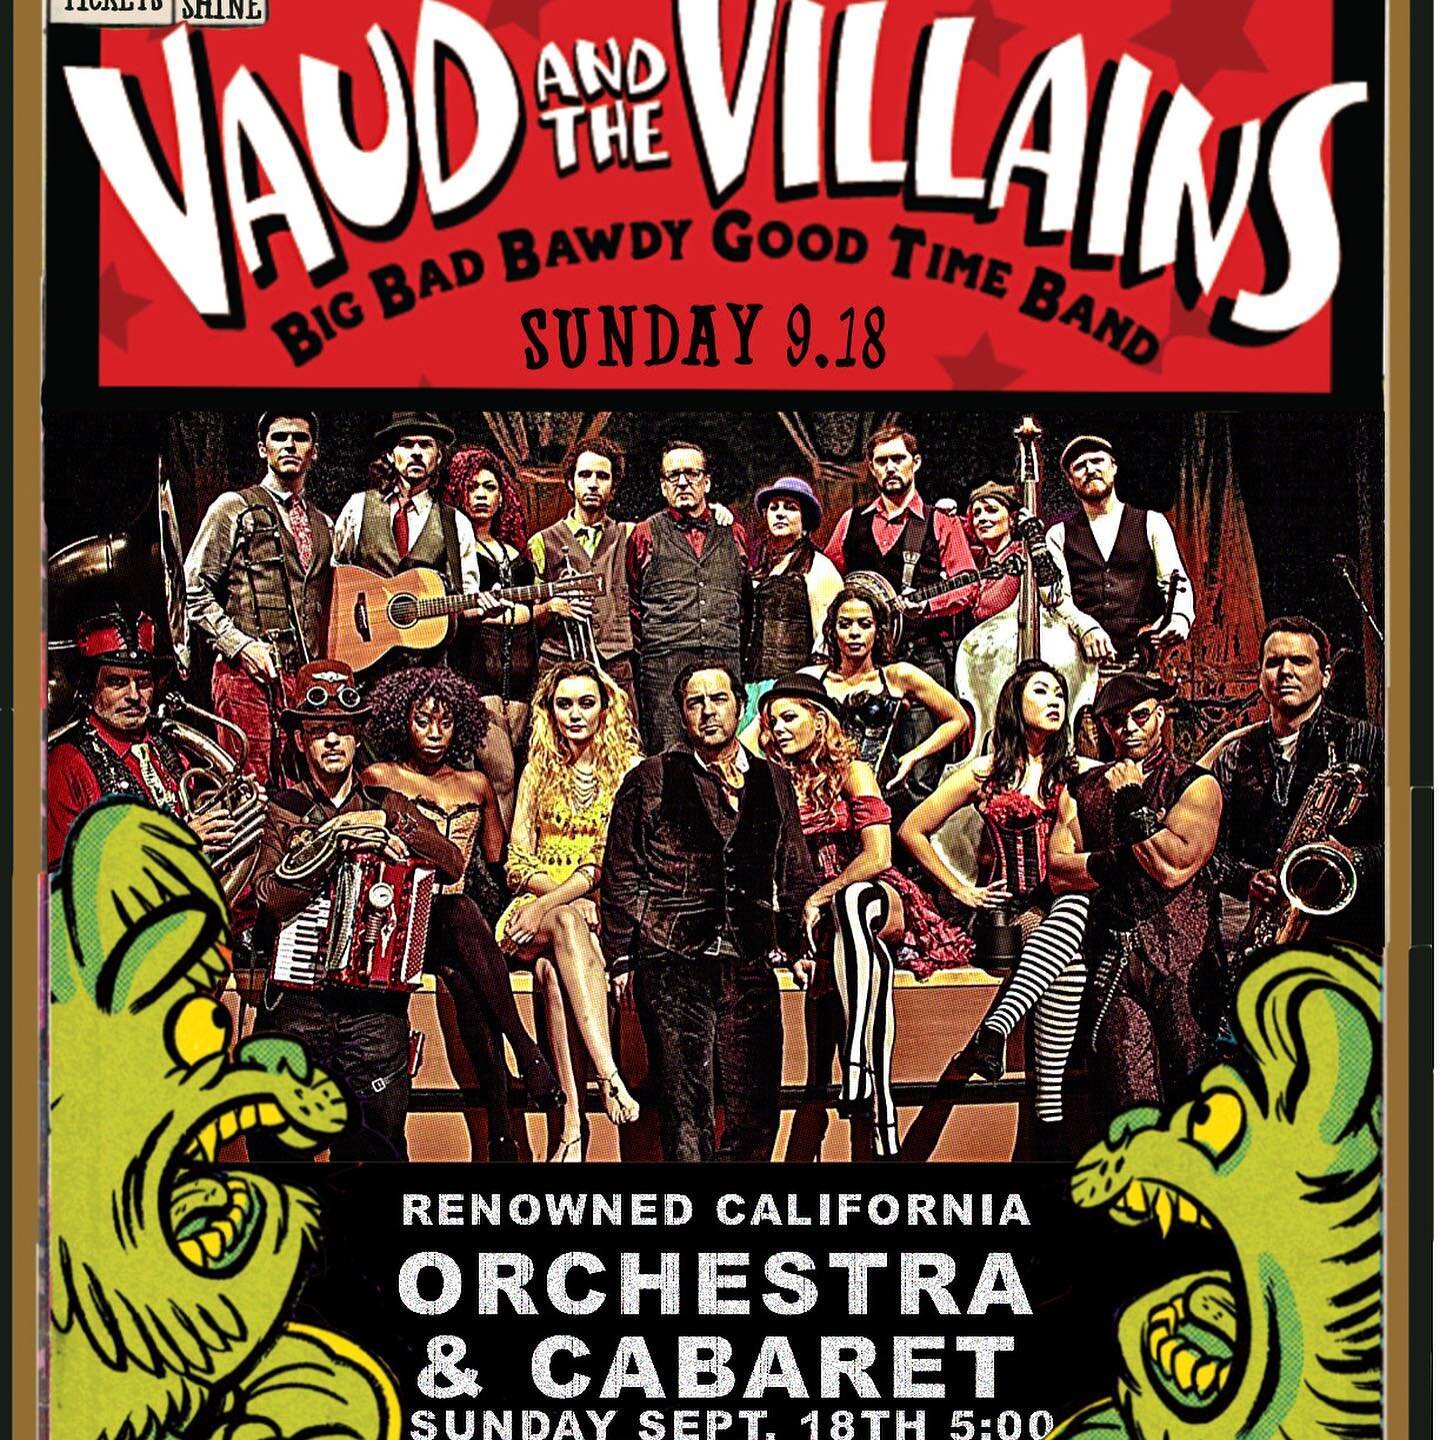 You really don&rsquo;t want to miss @vaud_and_the_villains show on Sunday September 18th! It&rsquo;s gonna be a ridiculously wild one, even by our standards. Boisterous party jug band, cabaret shenanigans! Look them up&hellip; and join us 9/18!

And 